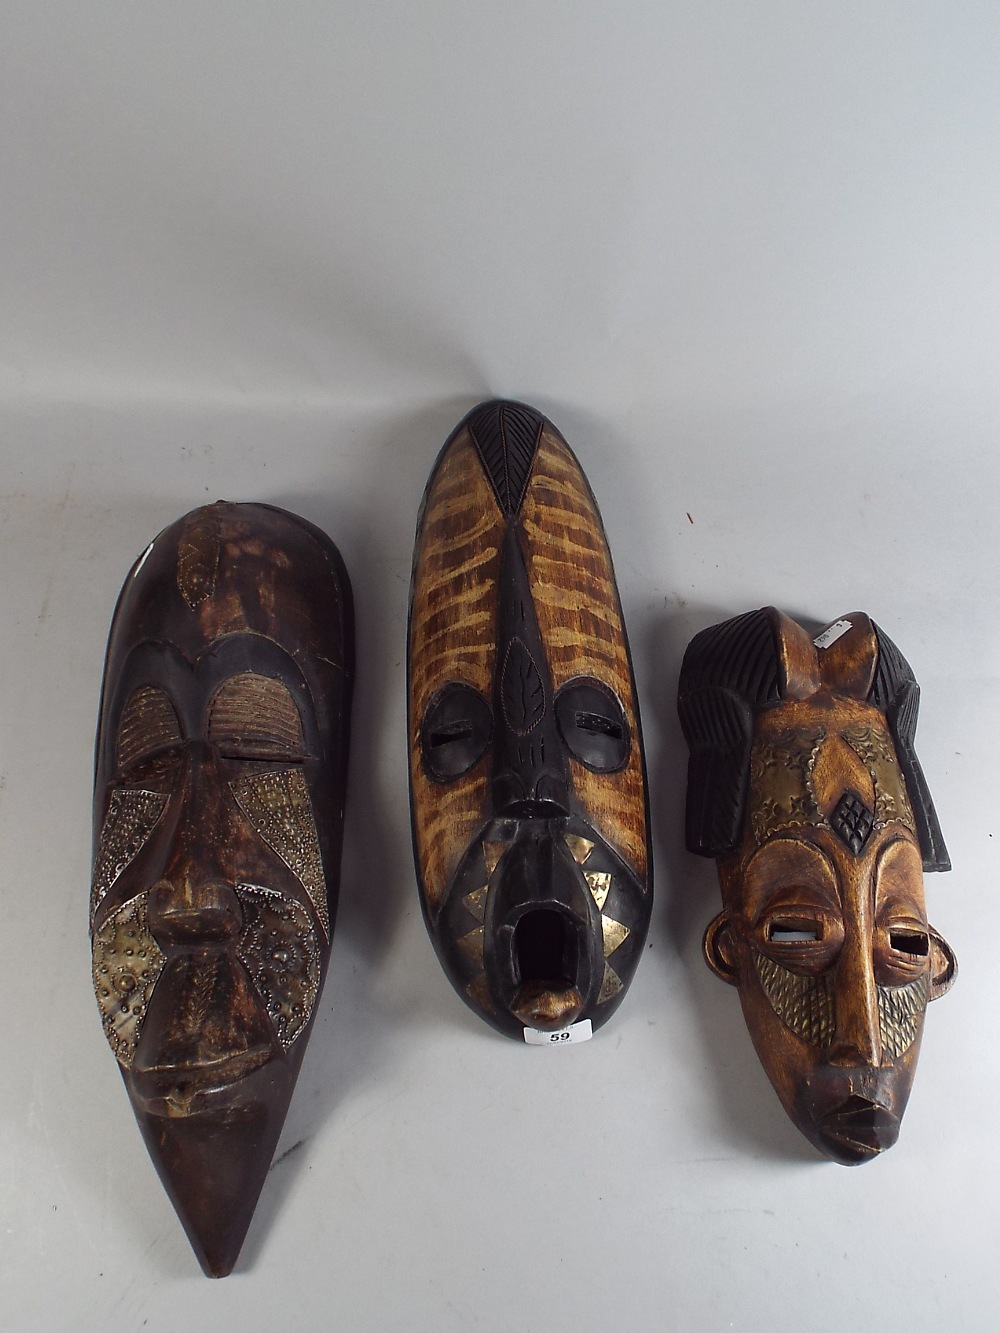 Three Carved Wooden Ethnic Masks.